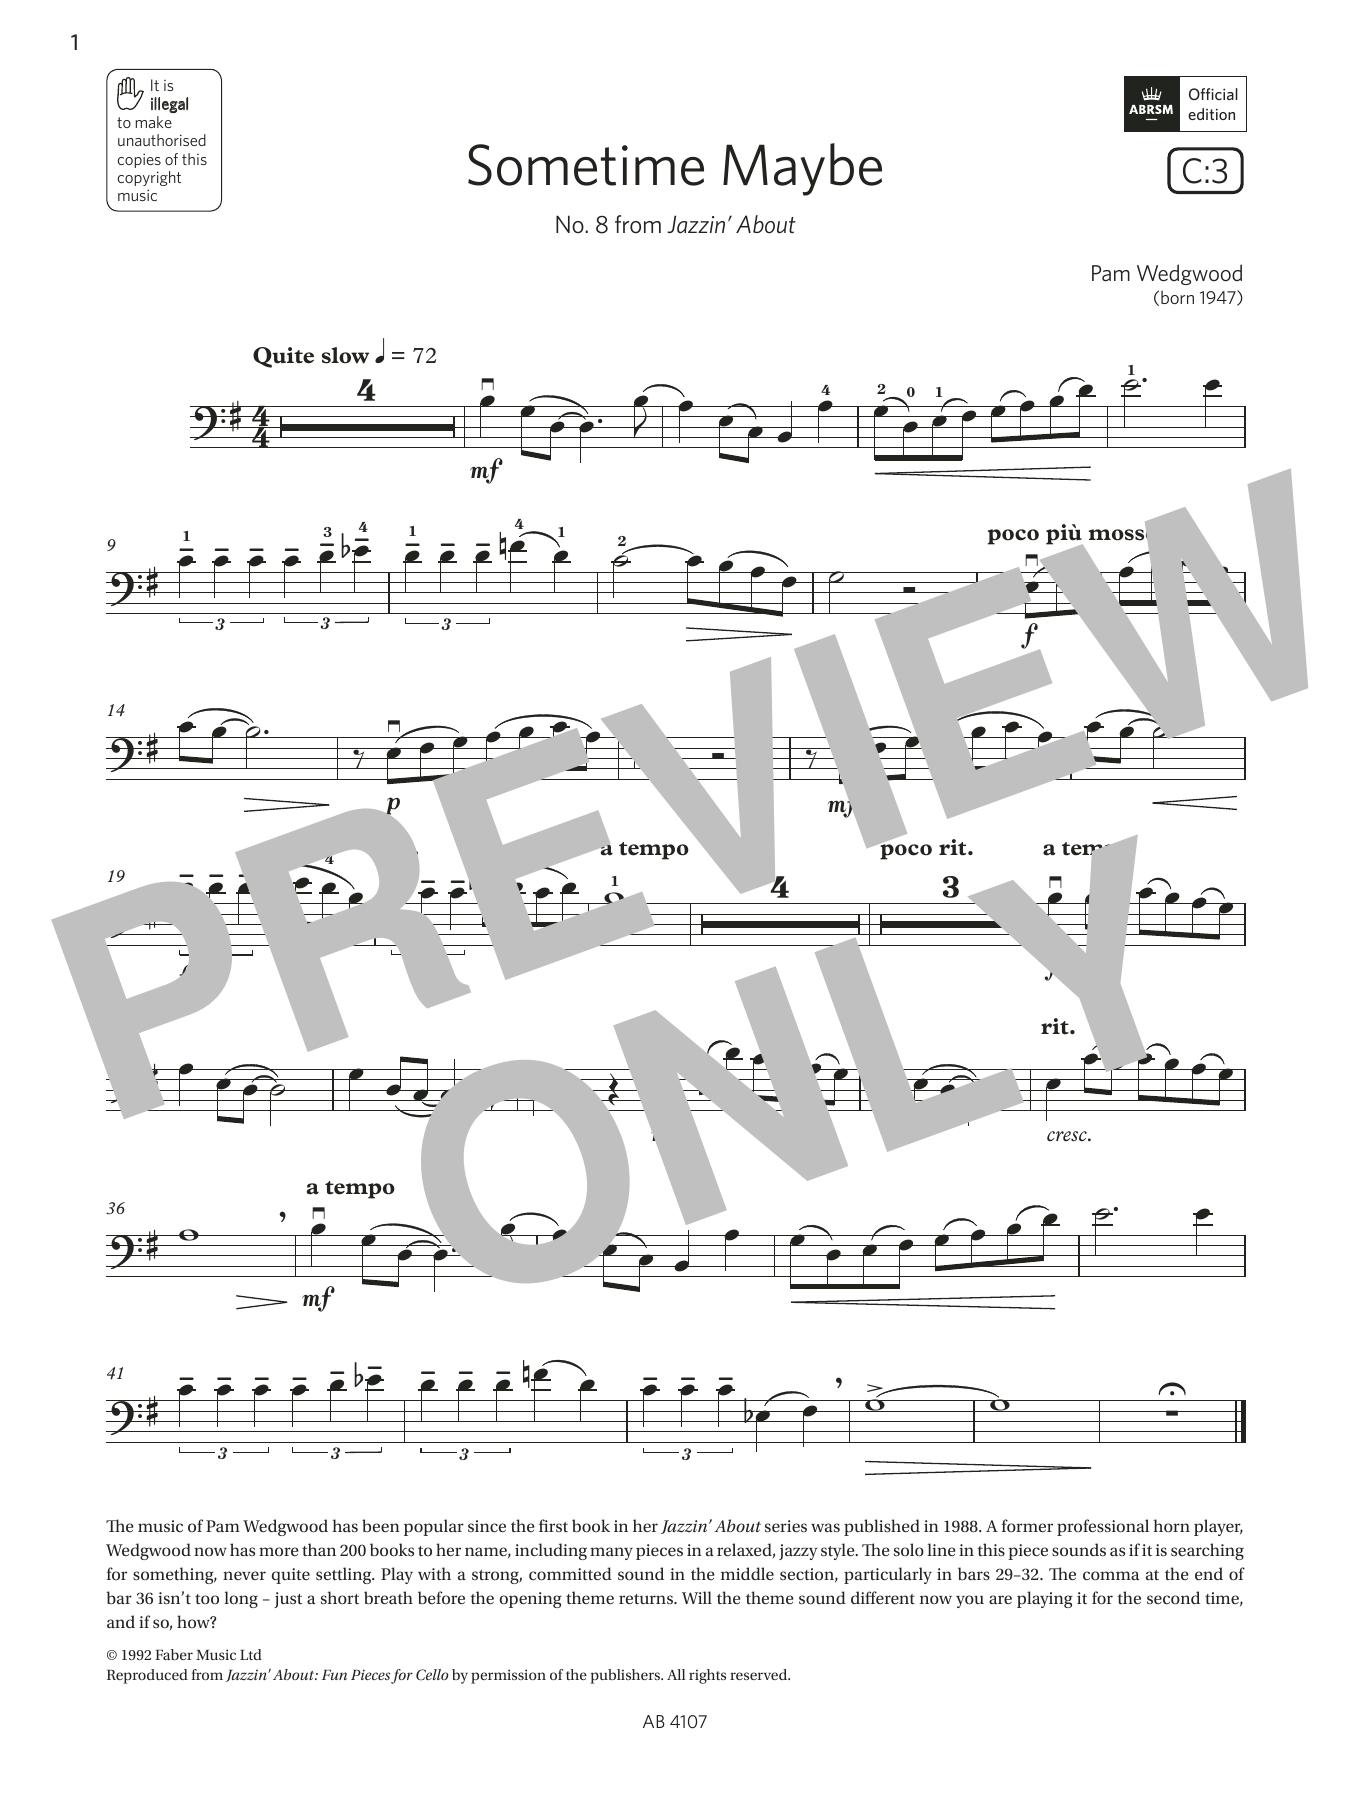 Download Pam Wedgwood Sometime Maybe (Grade 4, C3, from the A Sheet Music